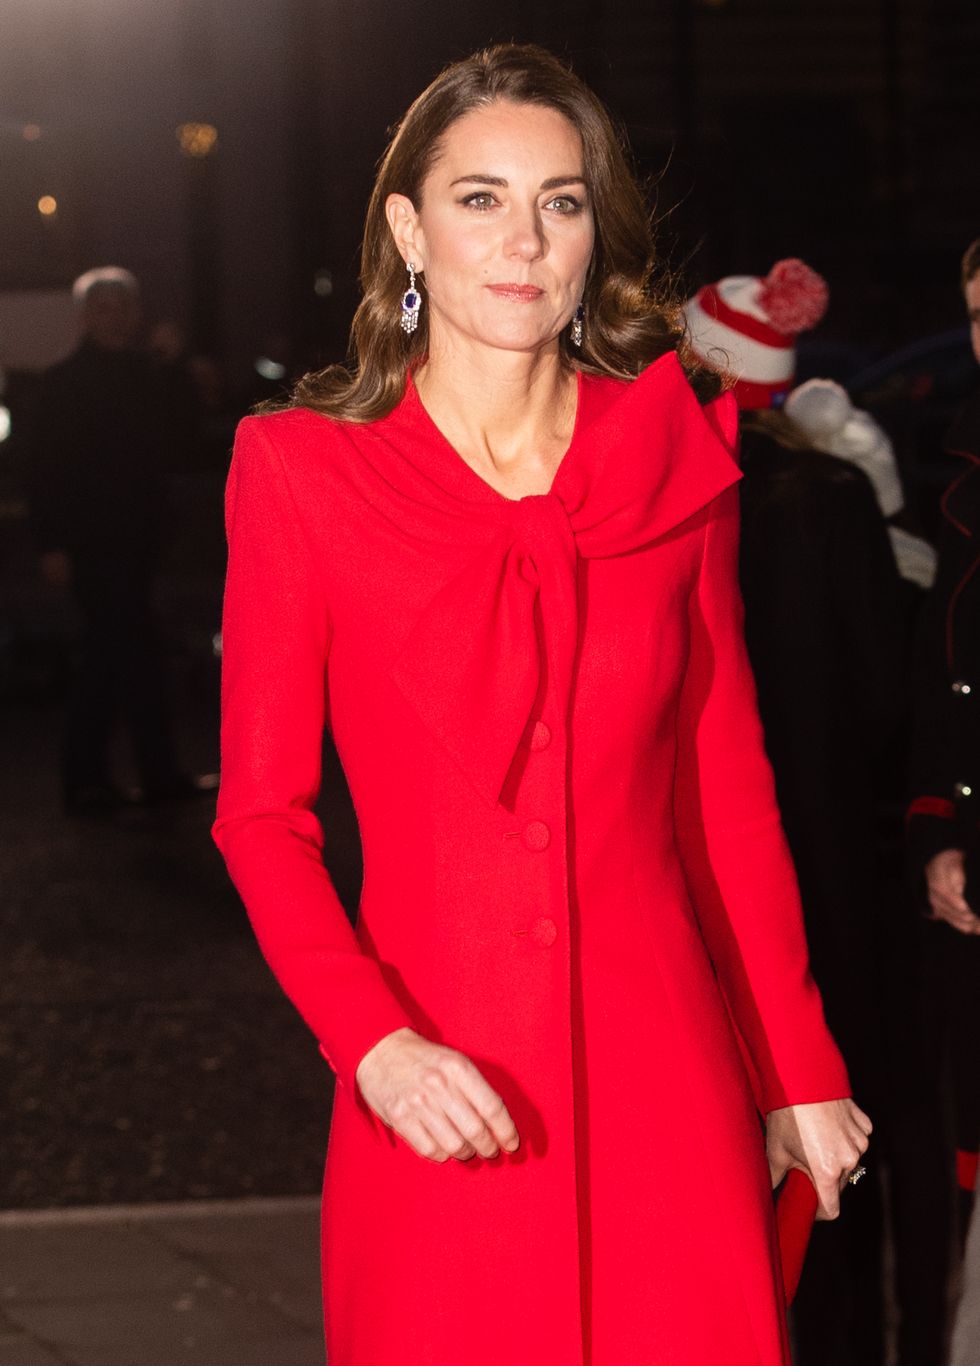 members of the royal family attend "together at christmas" community carol service